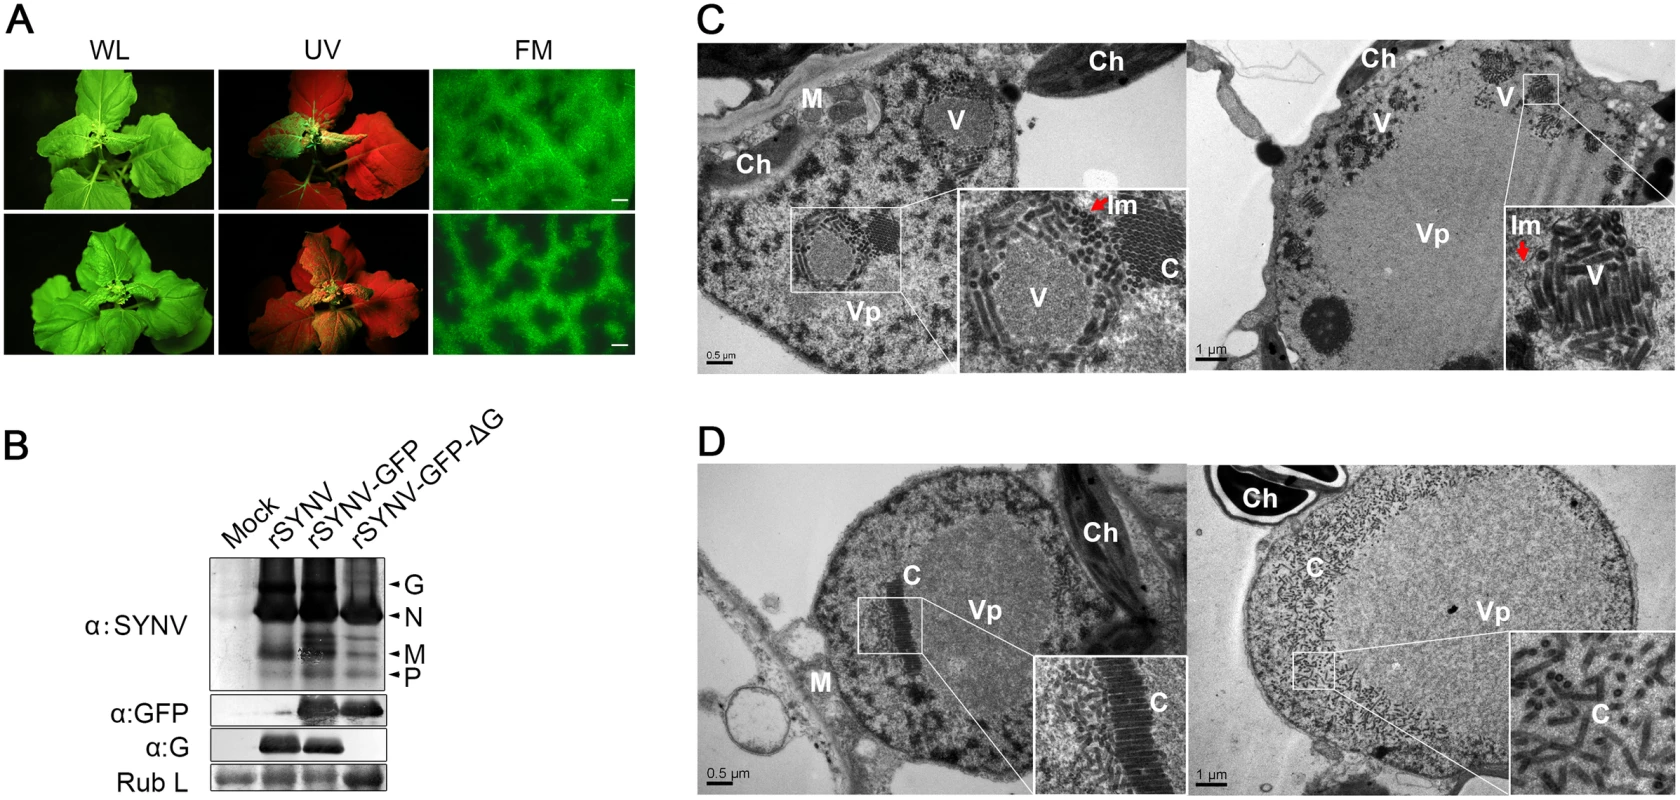 Role of the SYNV glycoprotein in systemic infection and virion maturation.